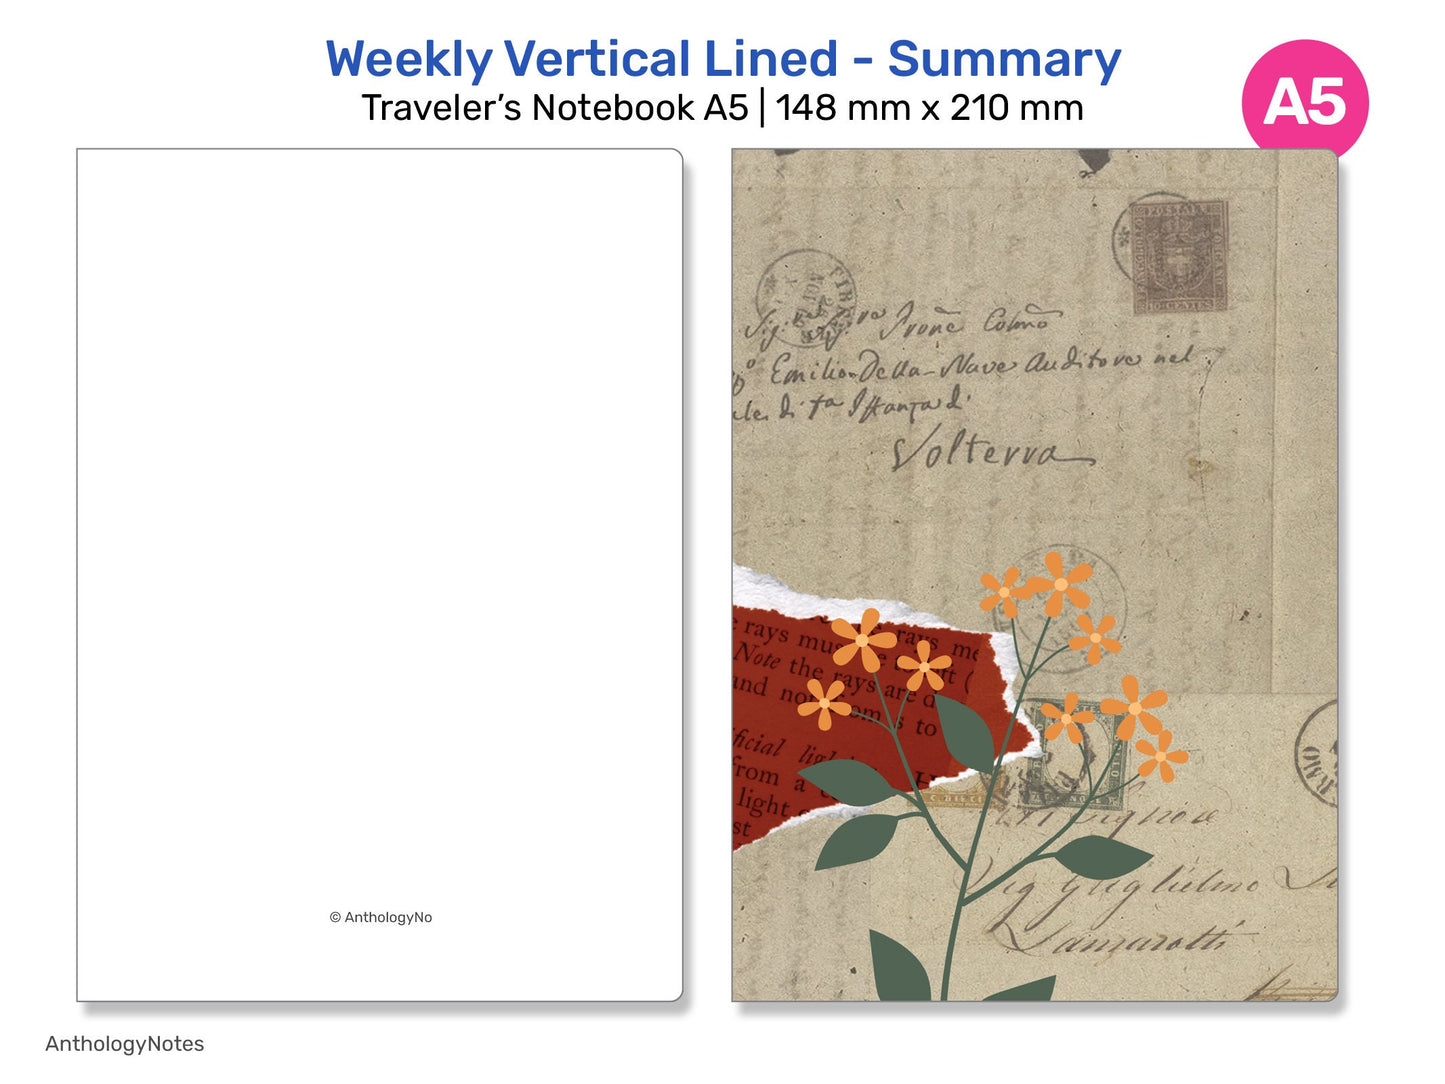 TN A5 Weekly Vertical Summary Wo2P Lined with Weekly Tracker Printable Traveler's Notebook Insert